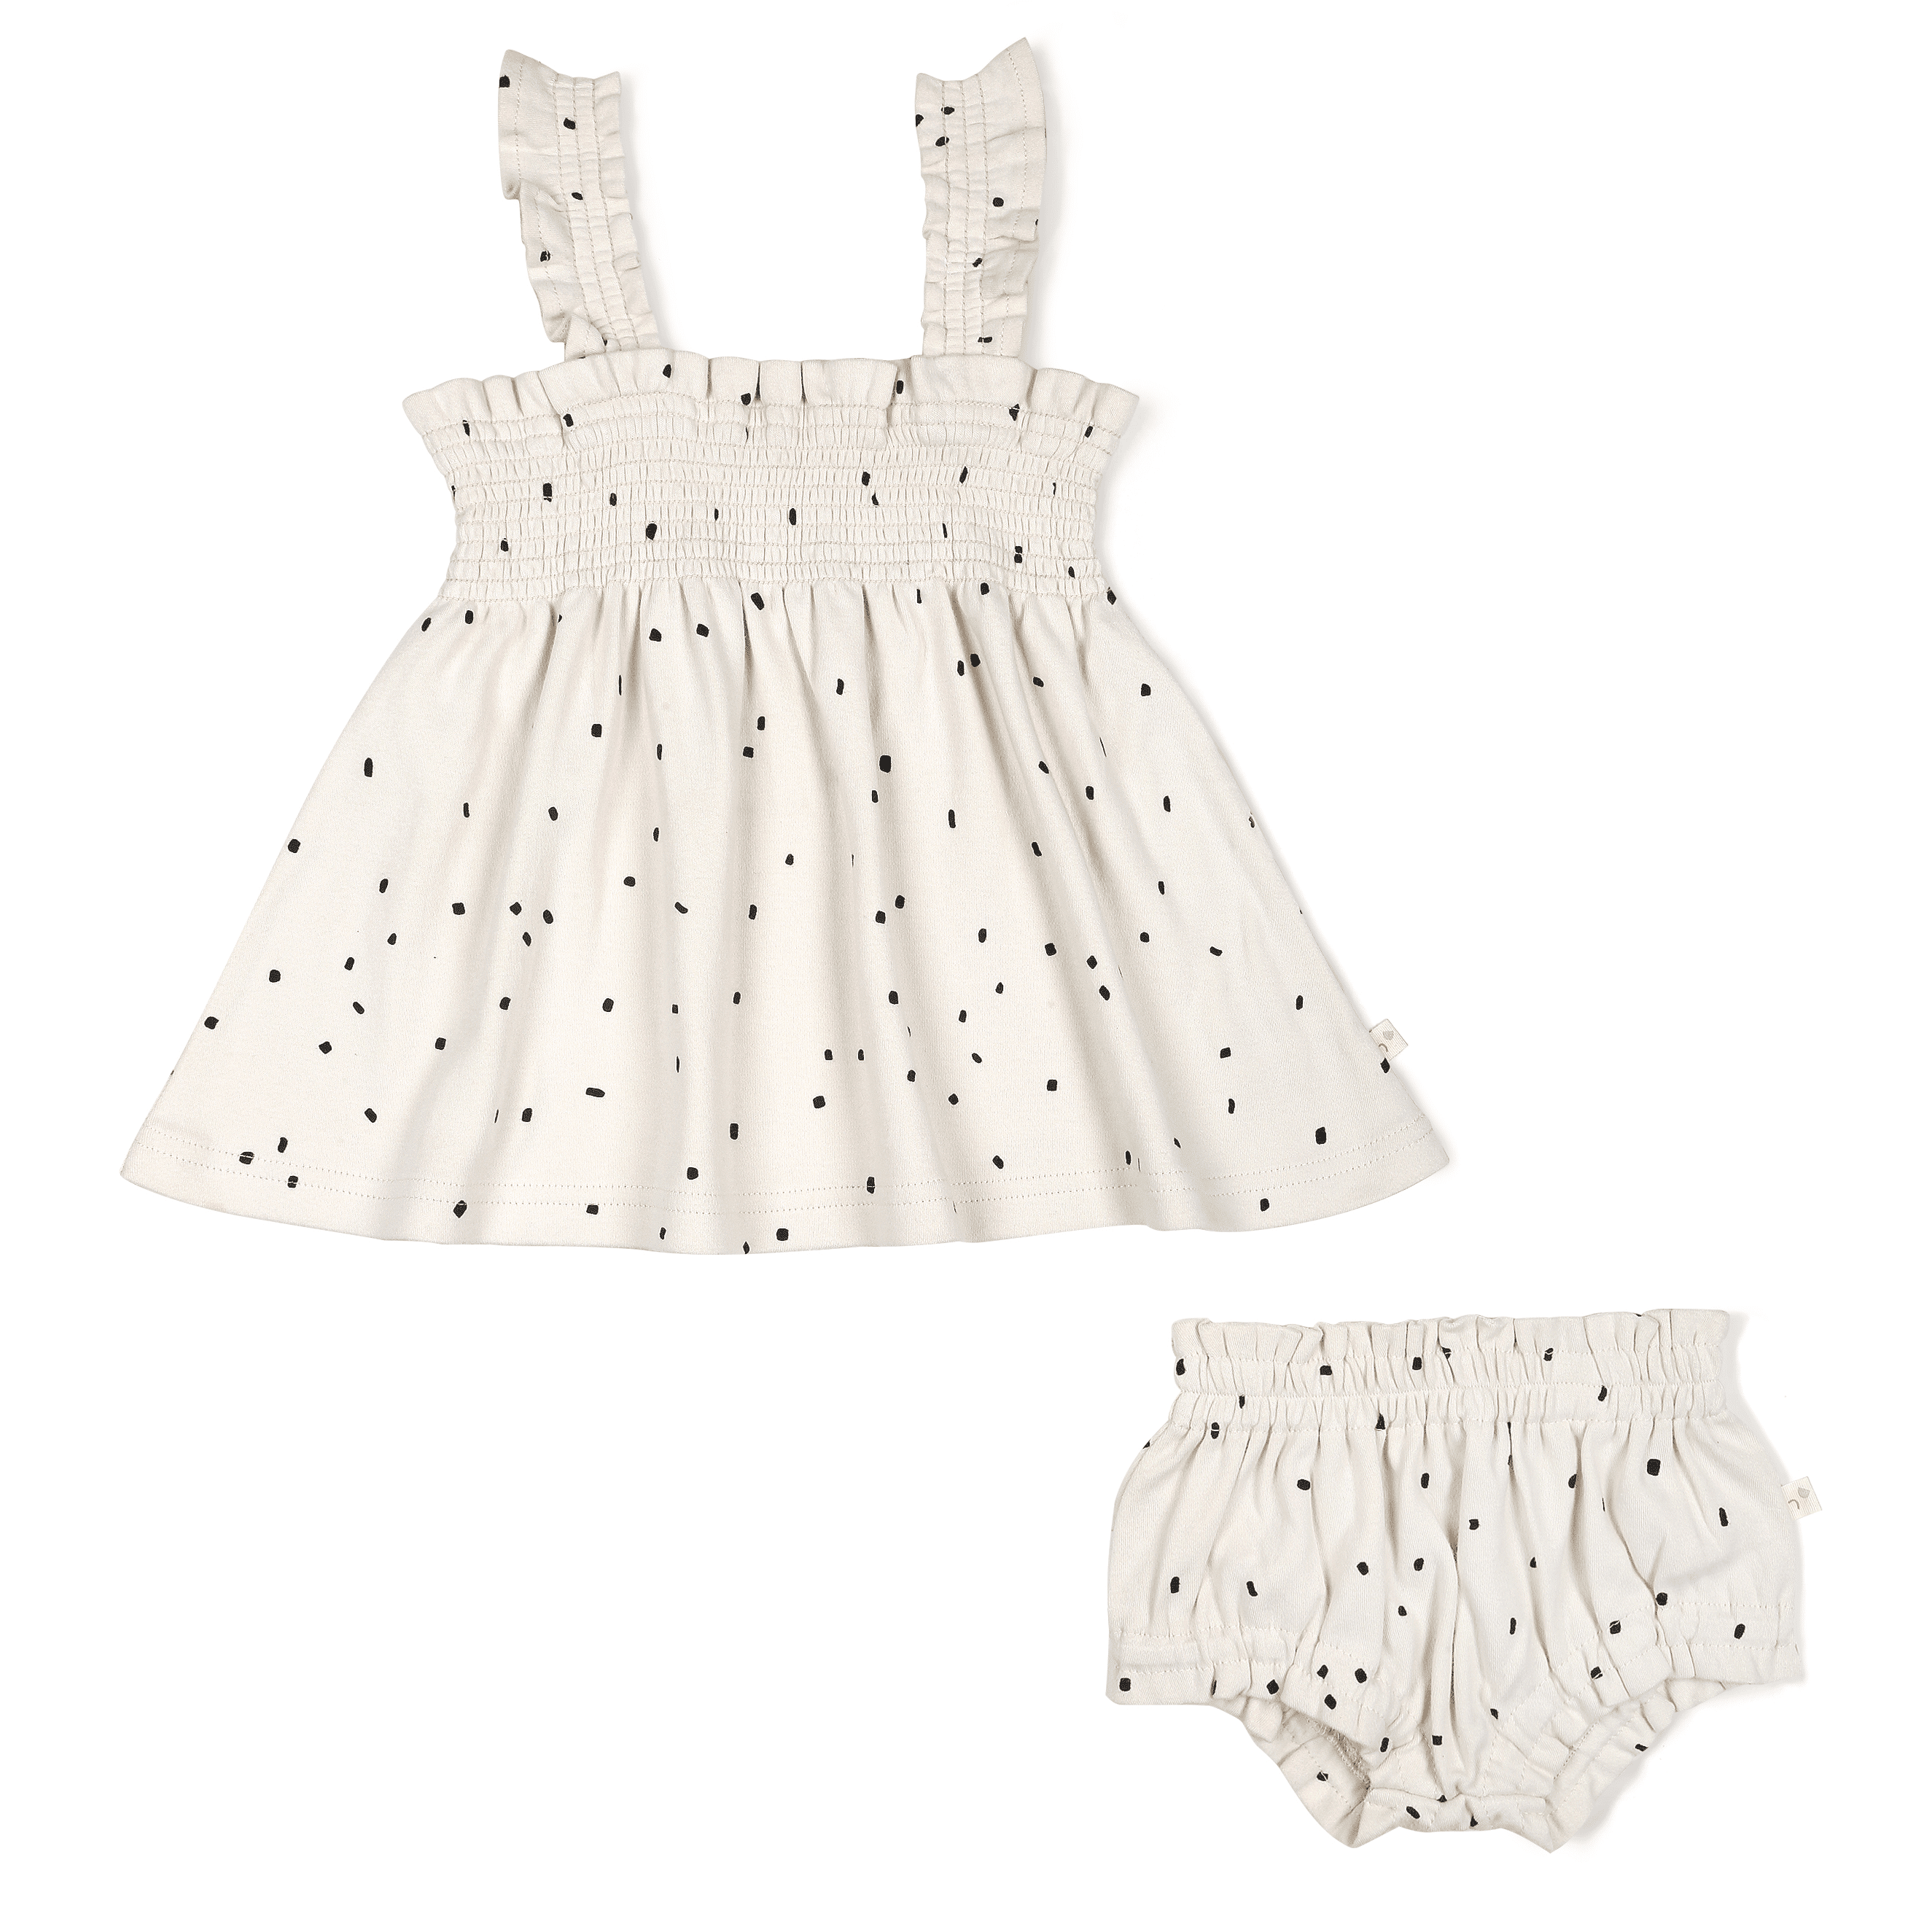 A cream-colored baby's Organic Smocked Dress - Pixie Dots with a smocked bodice and black polka dots, accompanied by matching bloomers, displayed on a white background from Makemake Organics.